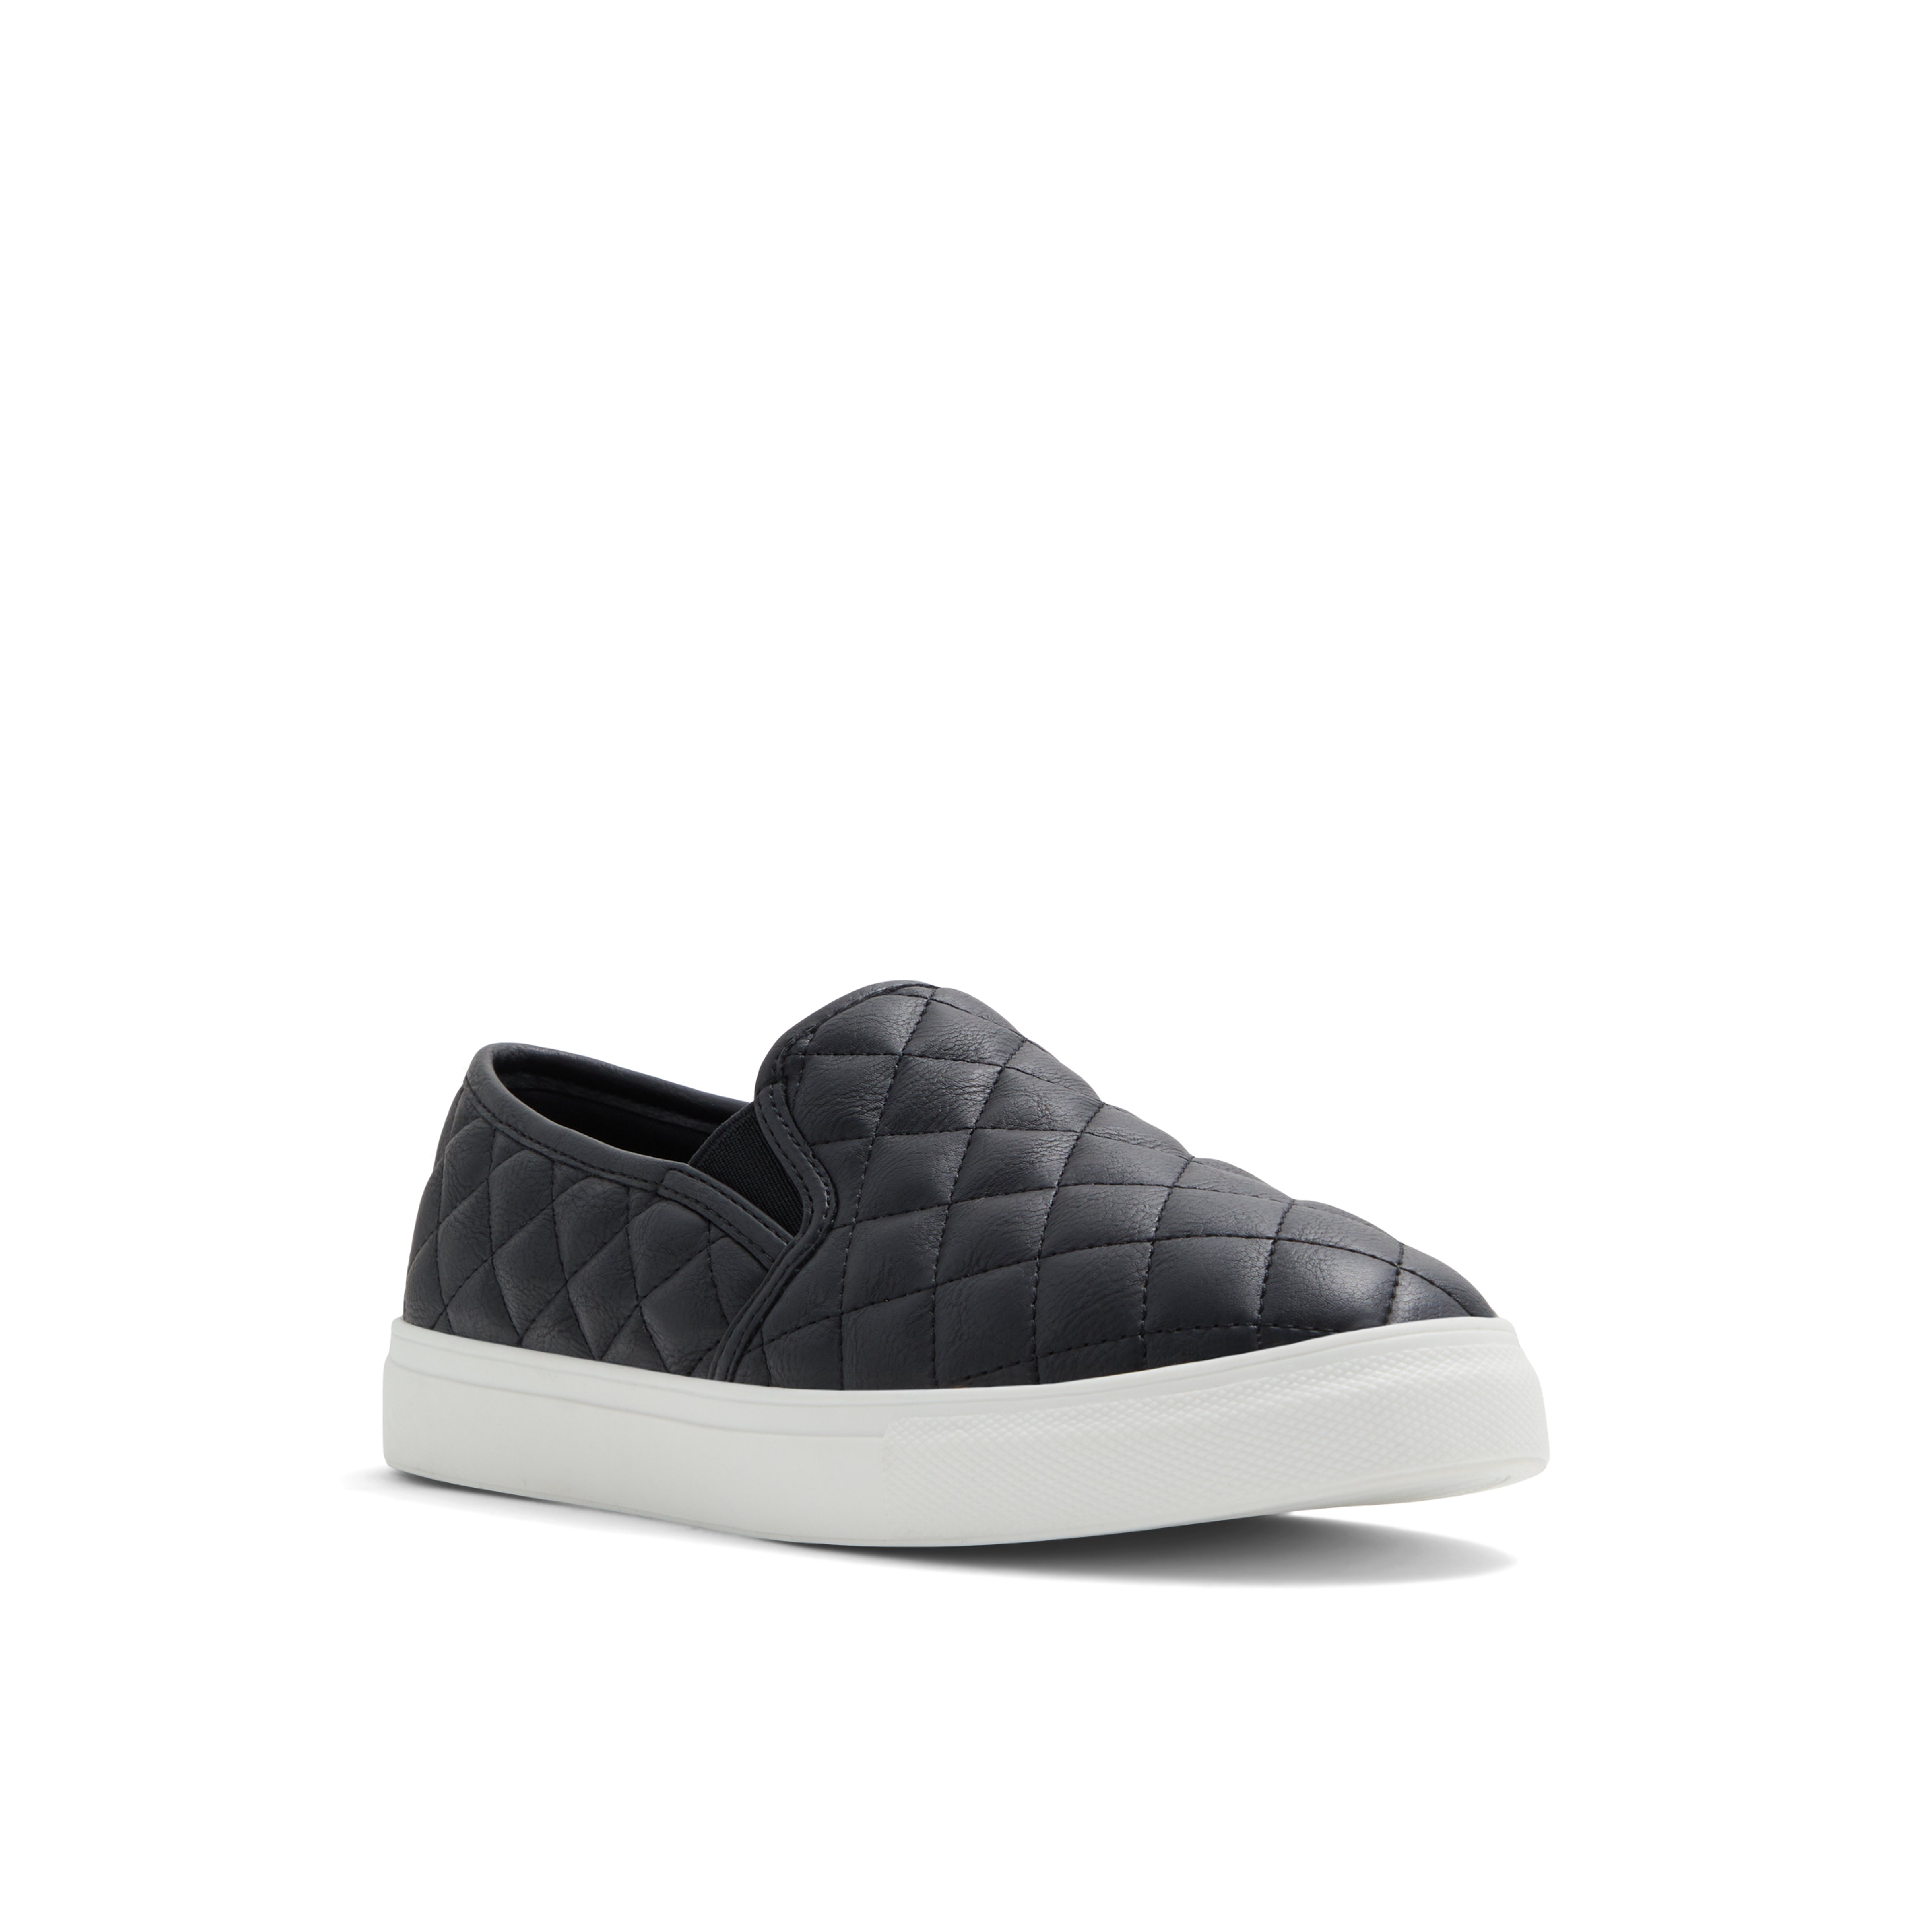 Iggyy Low top sneakers - Flat shoes